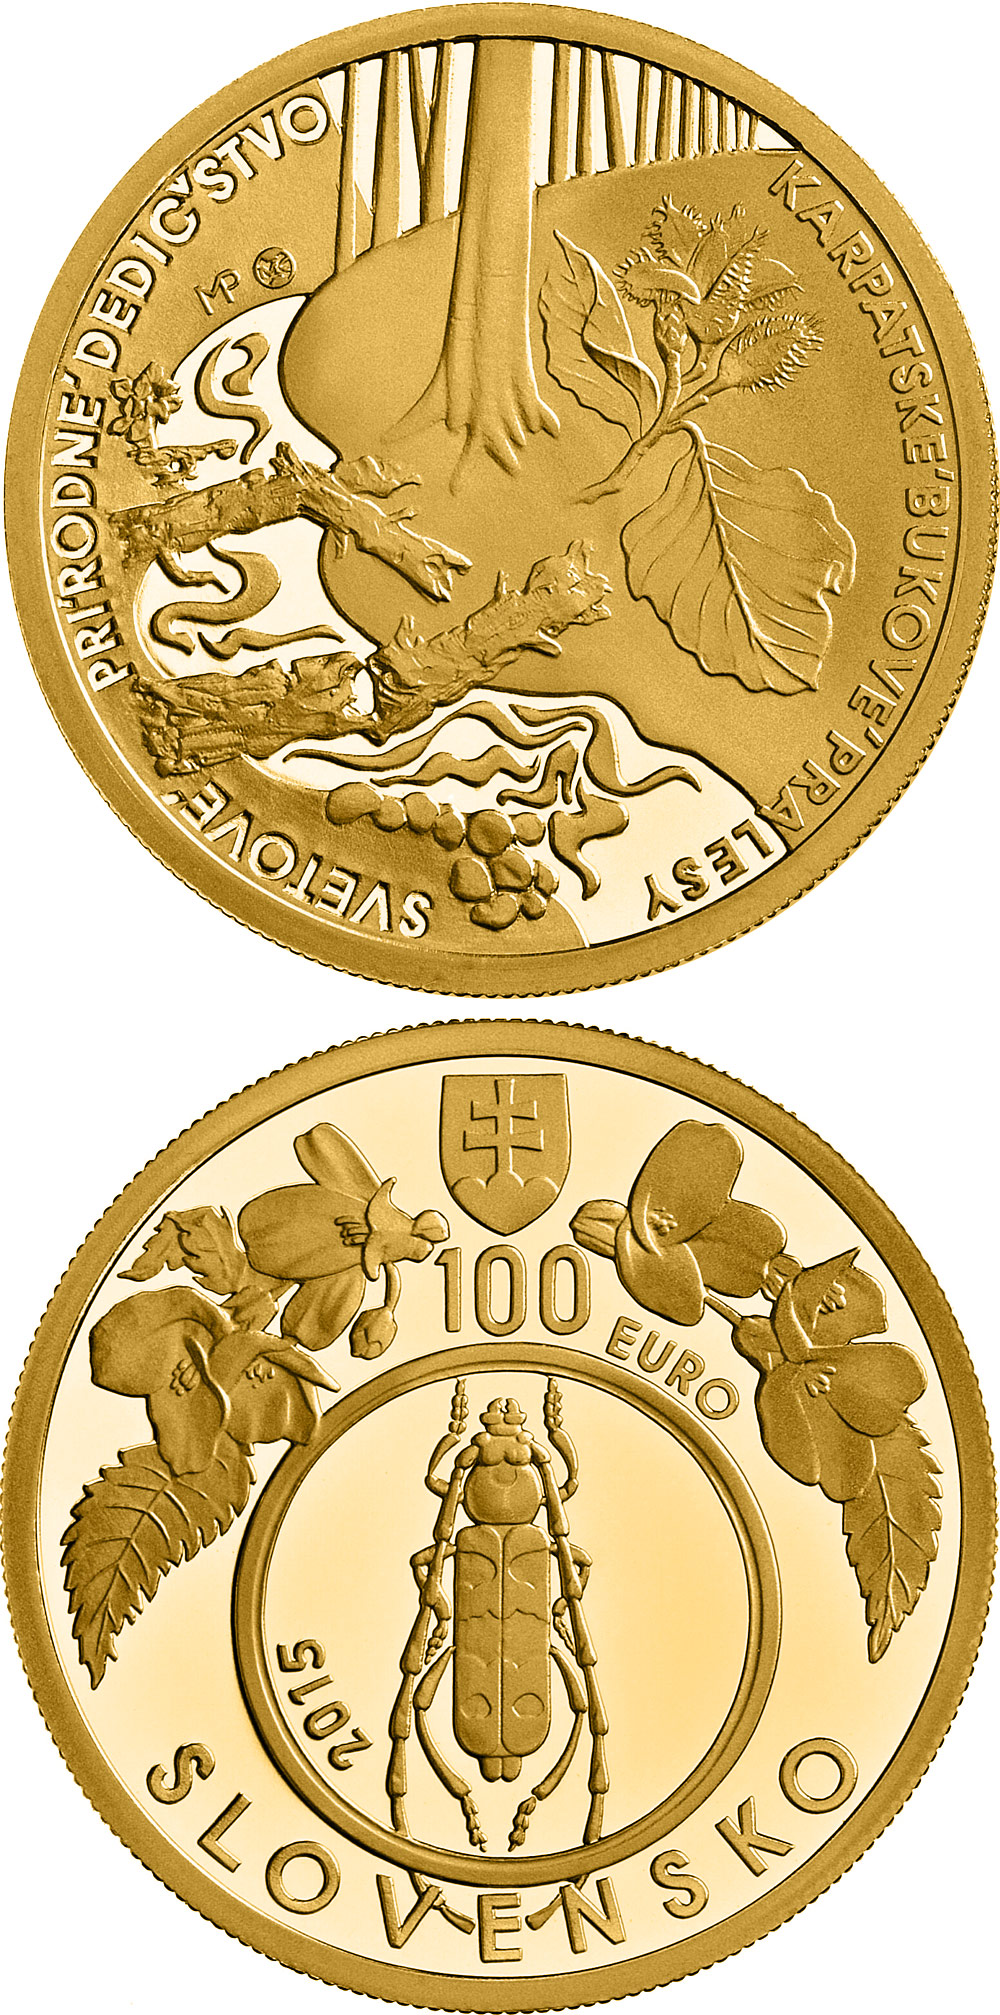 Gold 100 euro coins. The 100 euro coin series from Slovakia